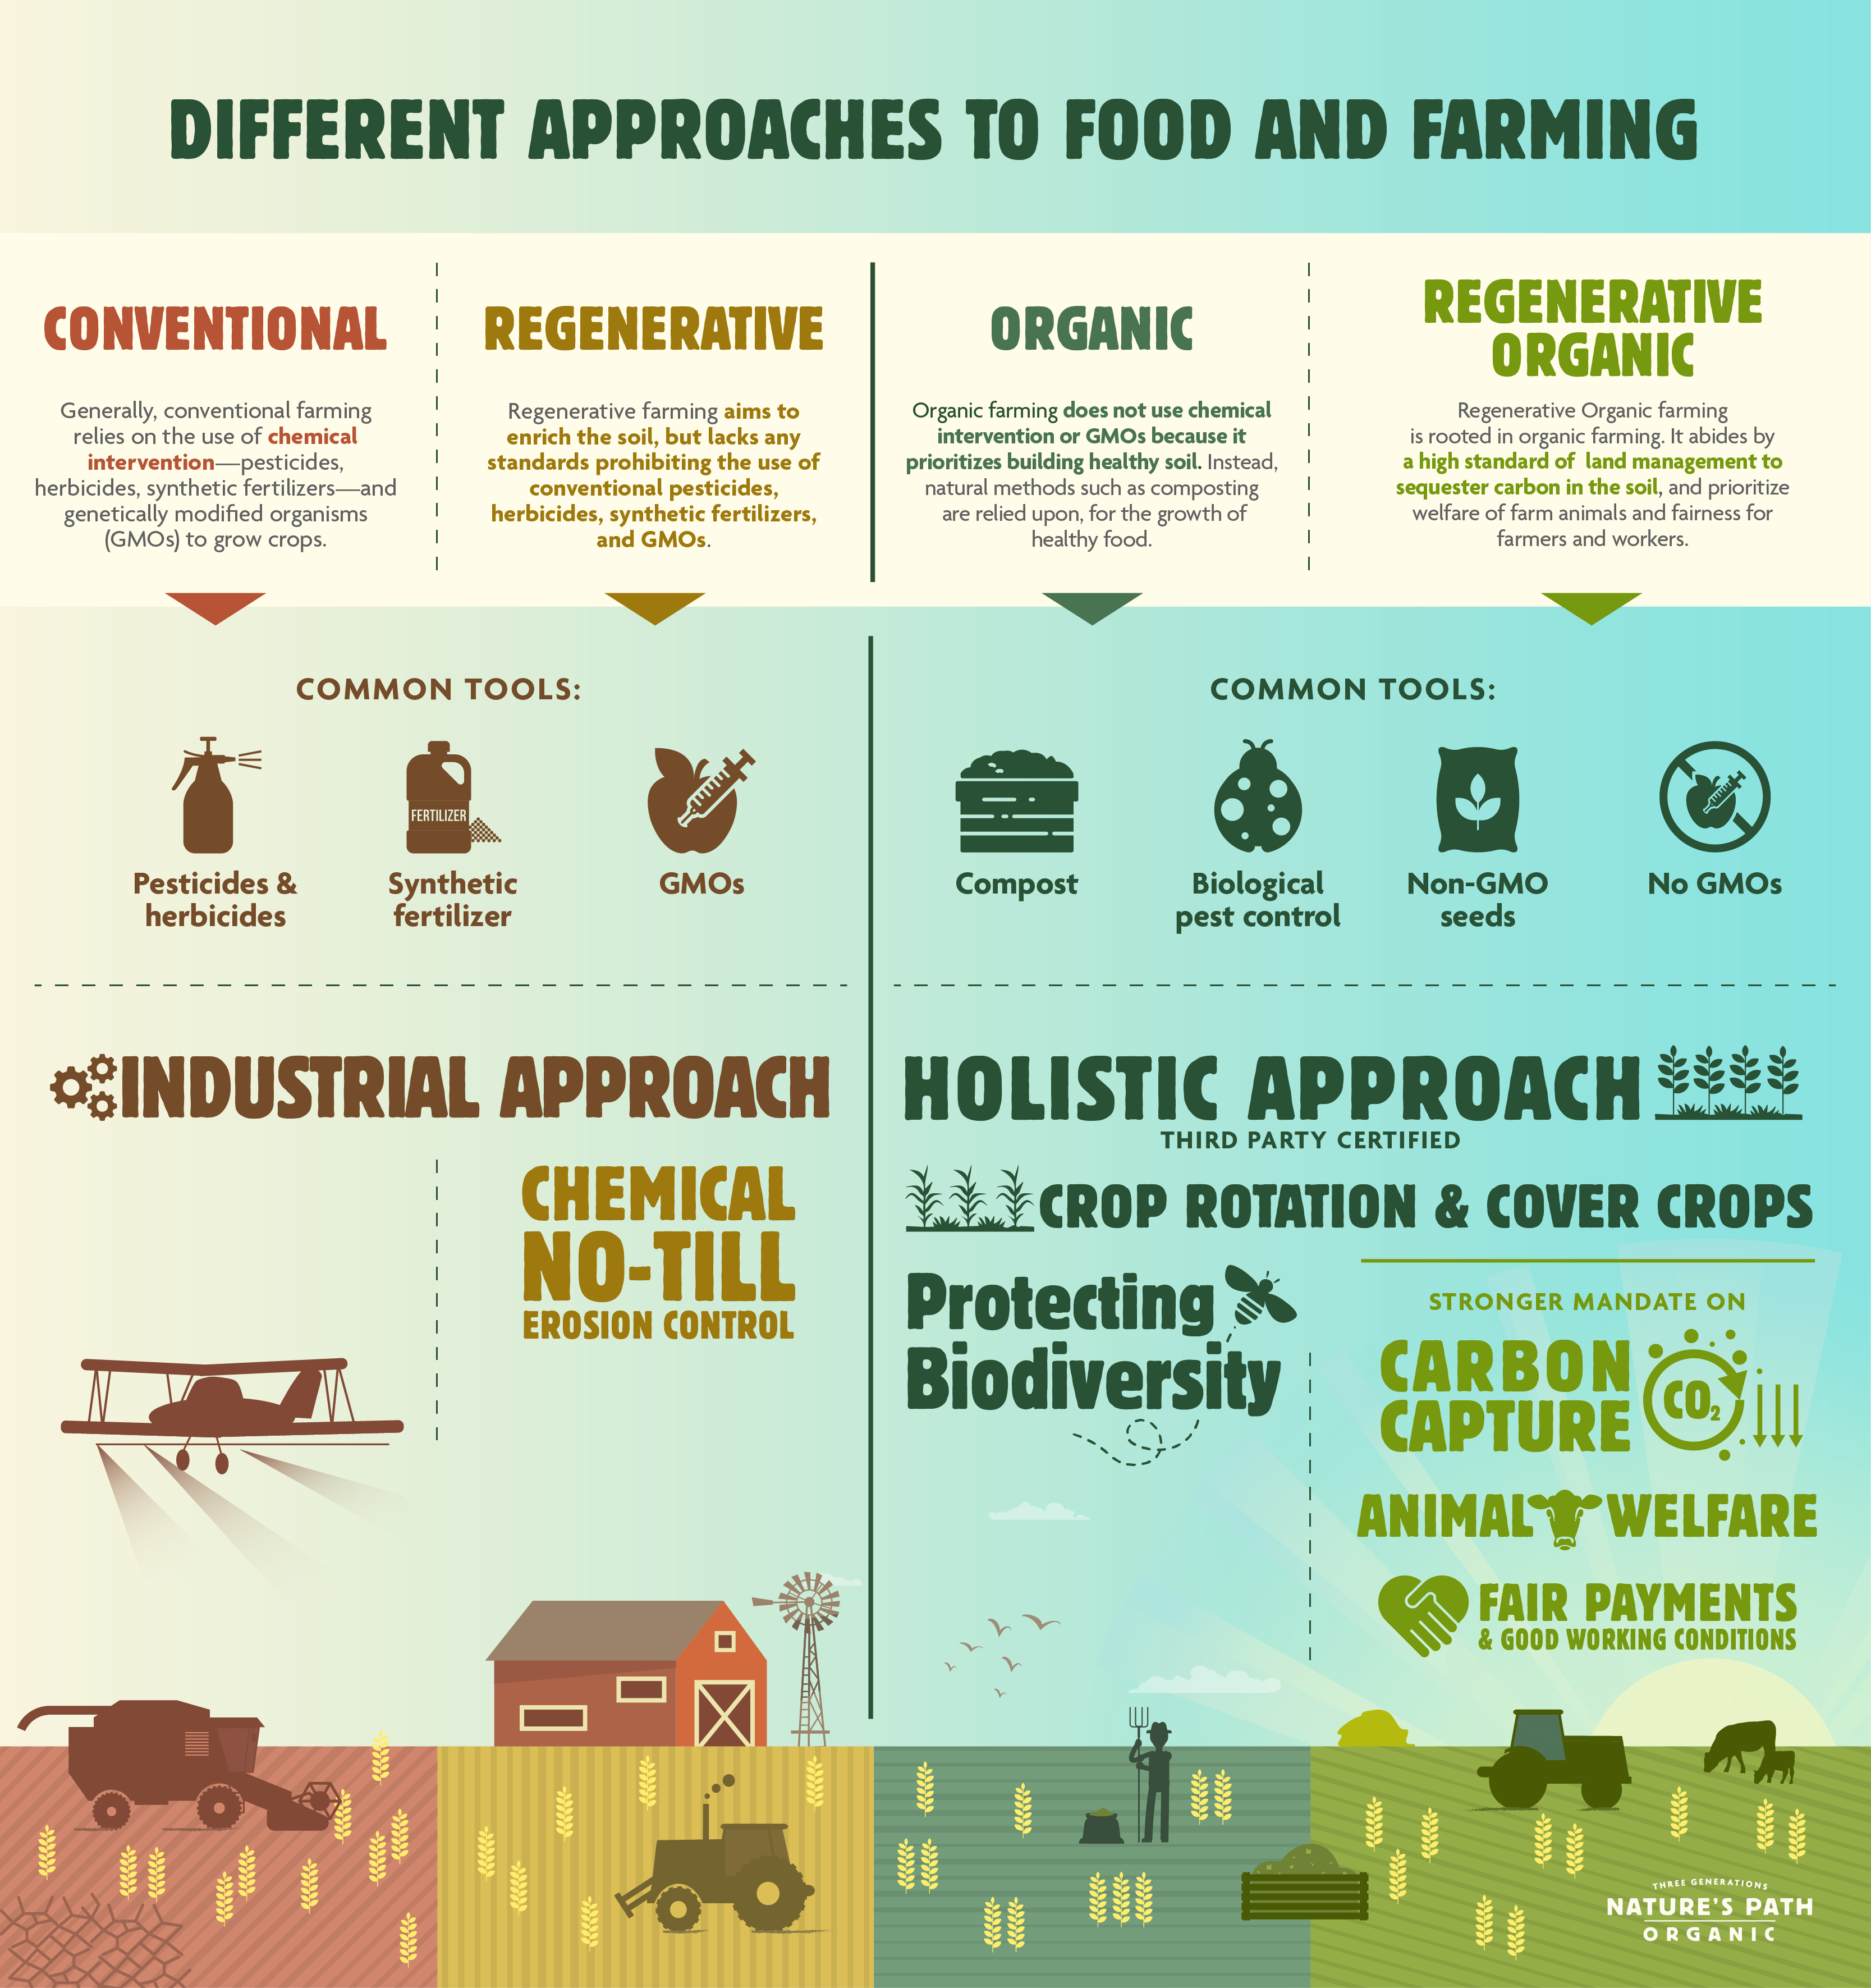 Difference between conventional, regenerative, and organic farming types